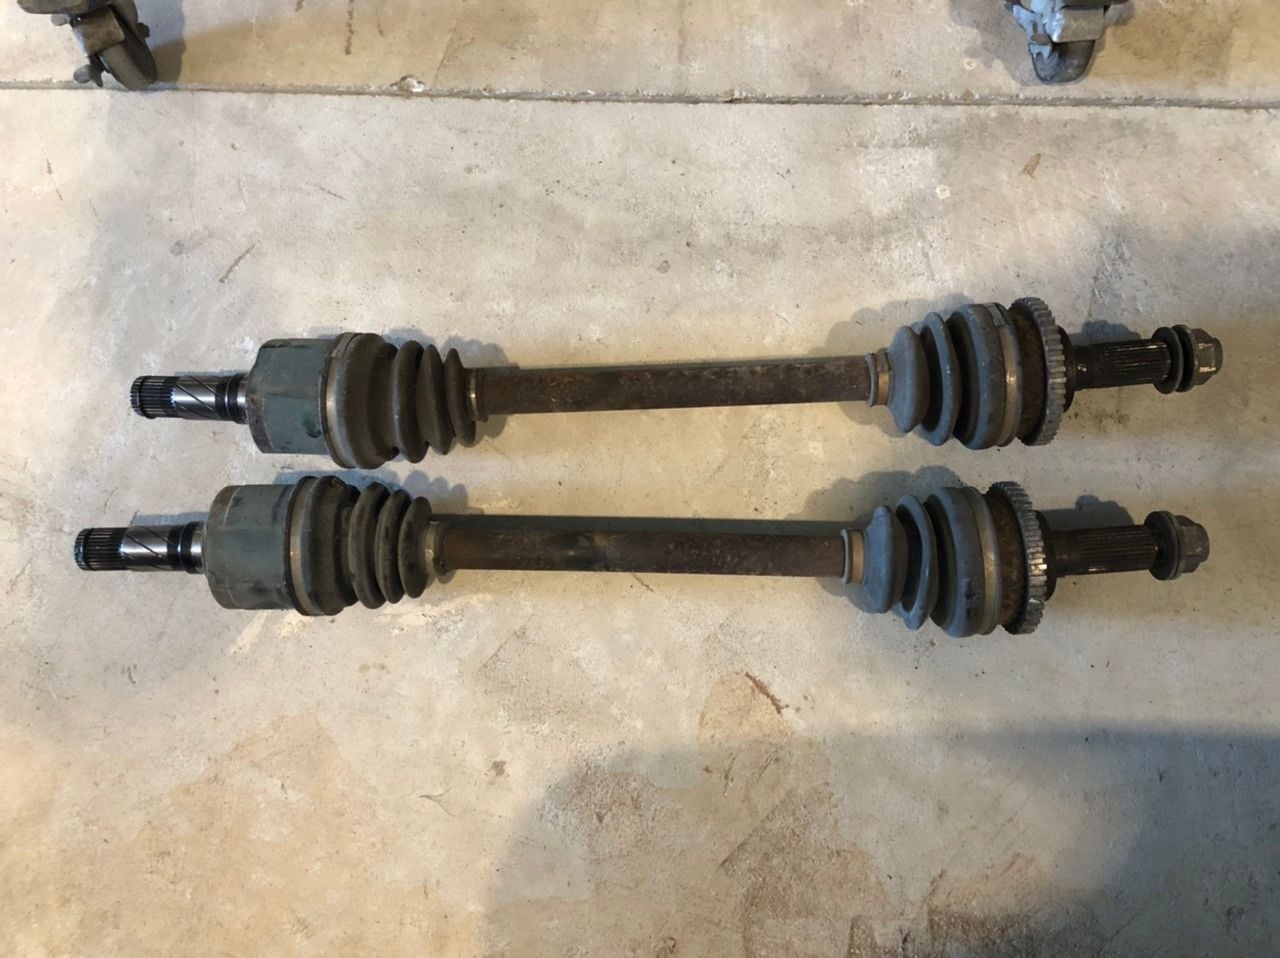 Miscellaneous - Upper intake,TPS,ThrottleBody,Motor mounts,Complete Axles - Used - 1992 to 2006 Mazda RX-7 - Charleston, SC 29492, United States